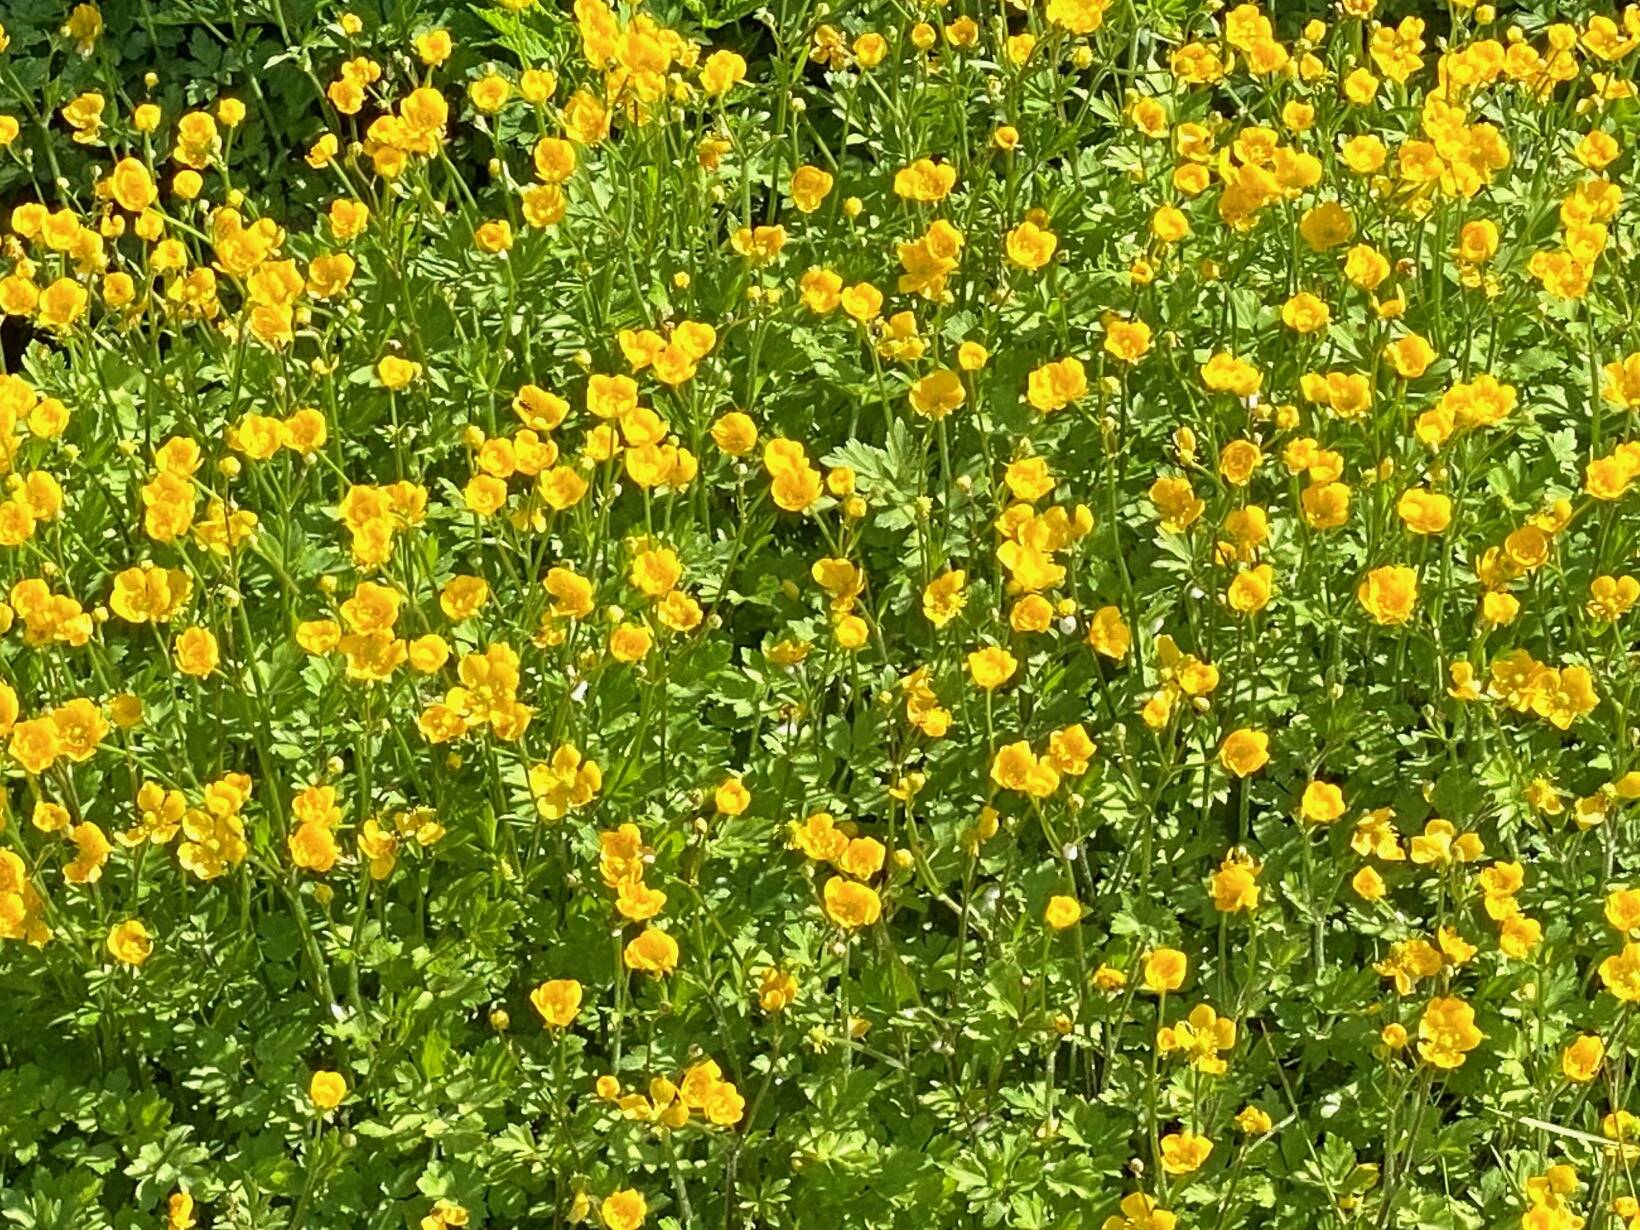 A cheery field of buttercups in Cowee Meadows seen on June 19. (Photo by Denise Carroll)